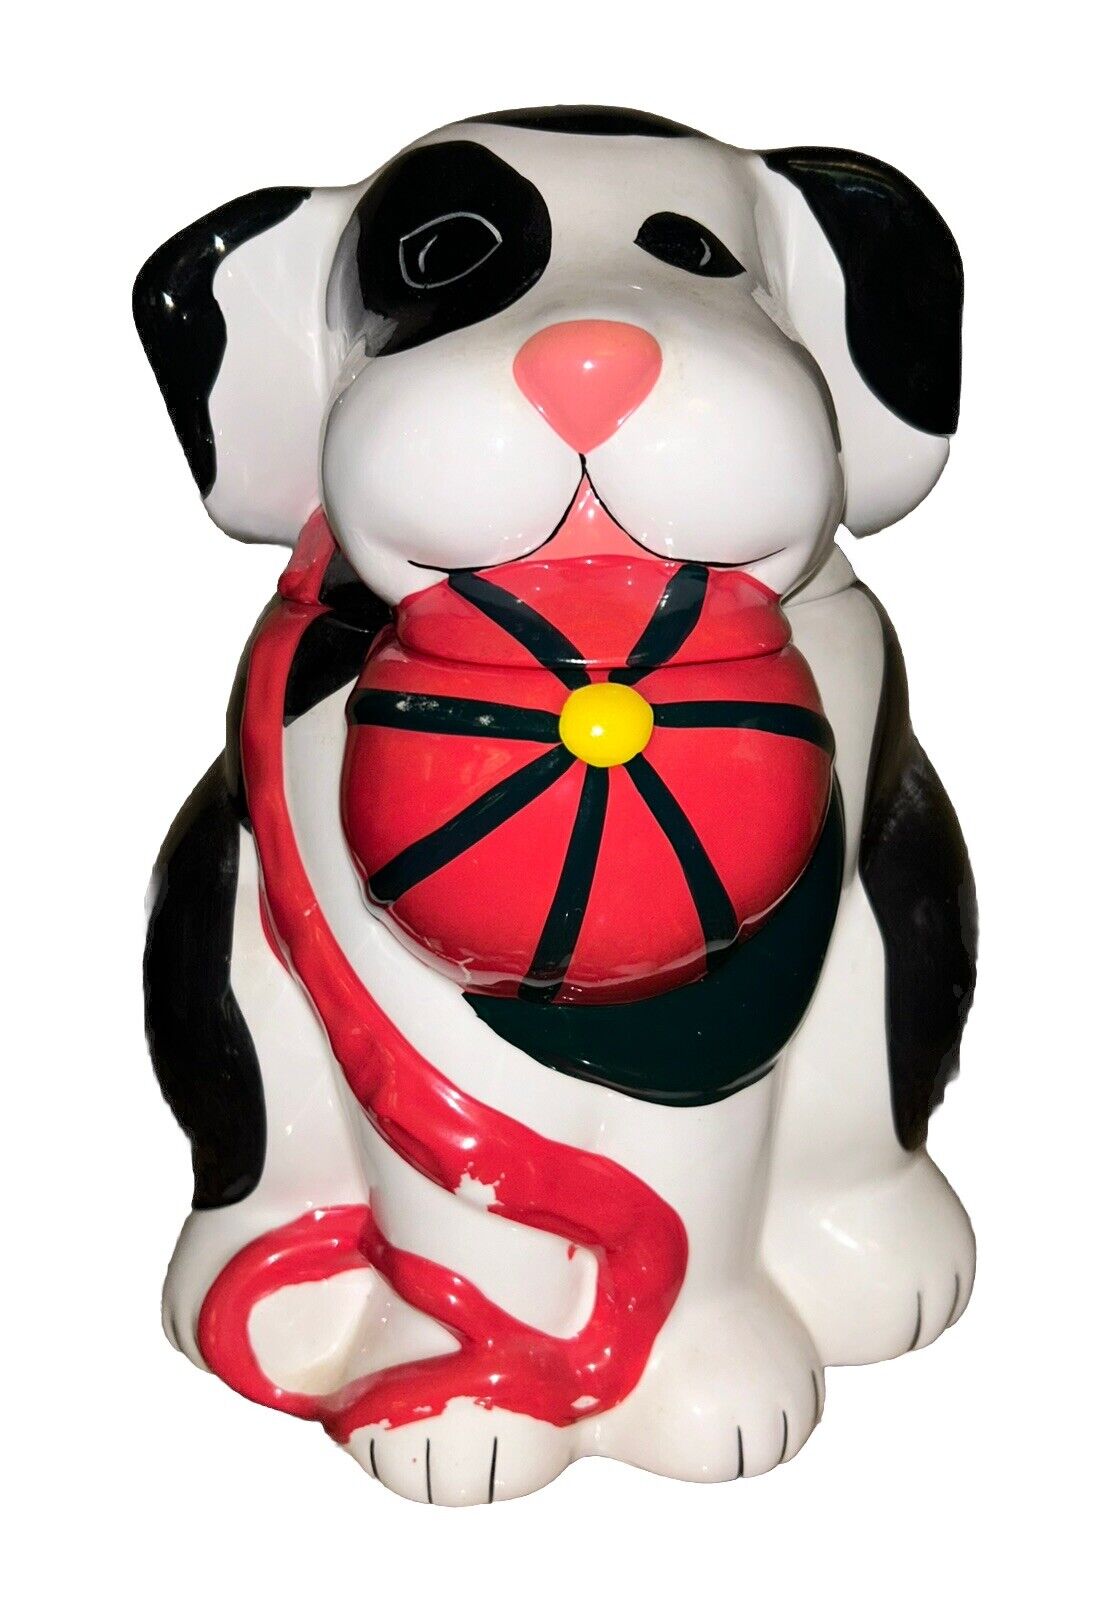 Vintage Ceramic Puppy Dog Cookie Jar Spotted Black/White 9.5” Tall Cute Adorible